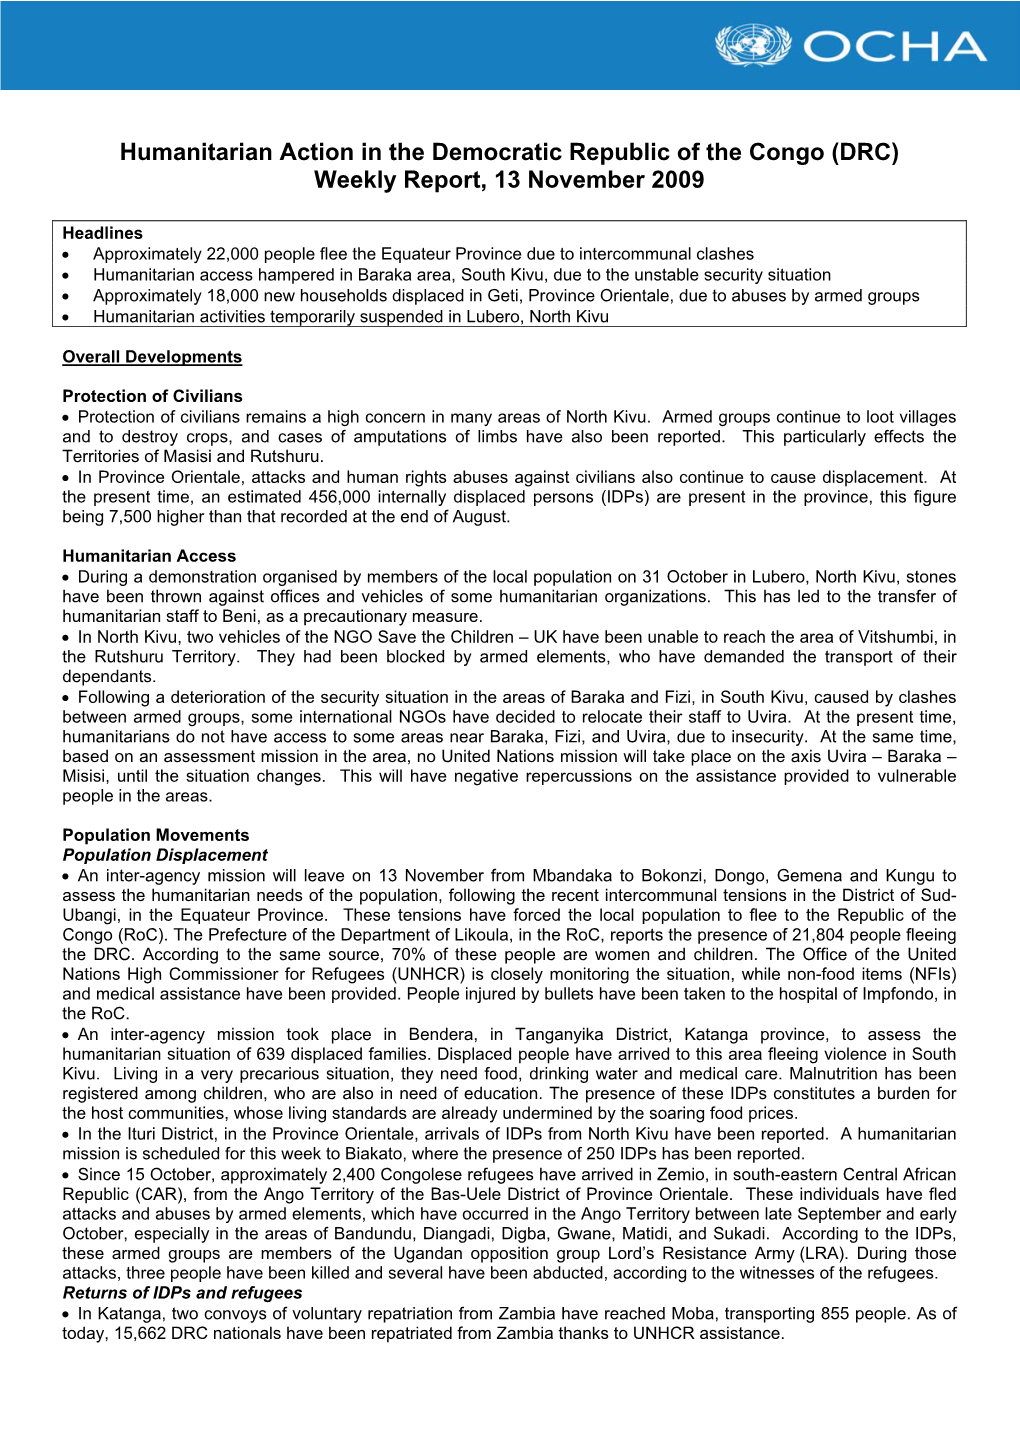 Humanitarian Action in the Democratic Republic of the Congo (DRC) Weekly Report, 13 November 2009